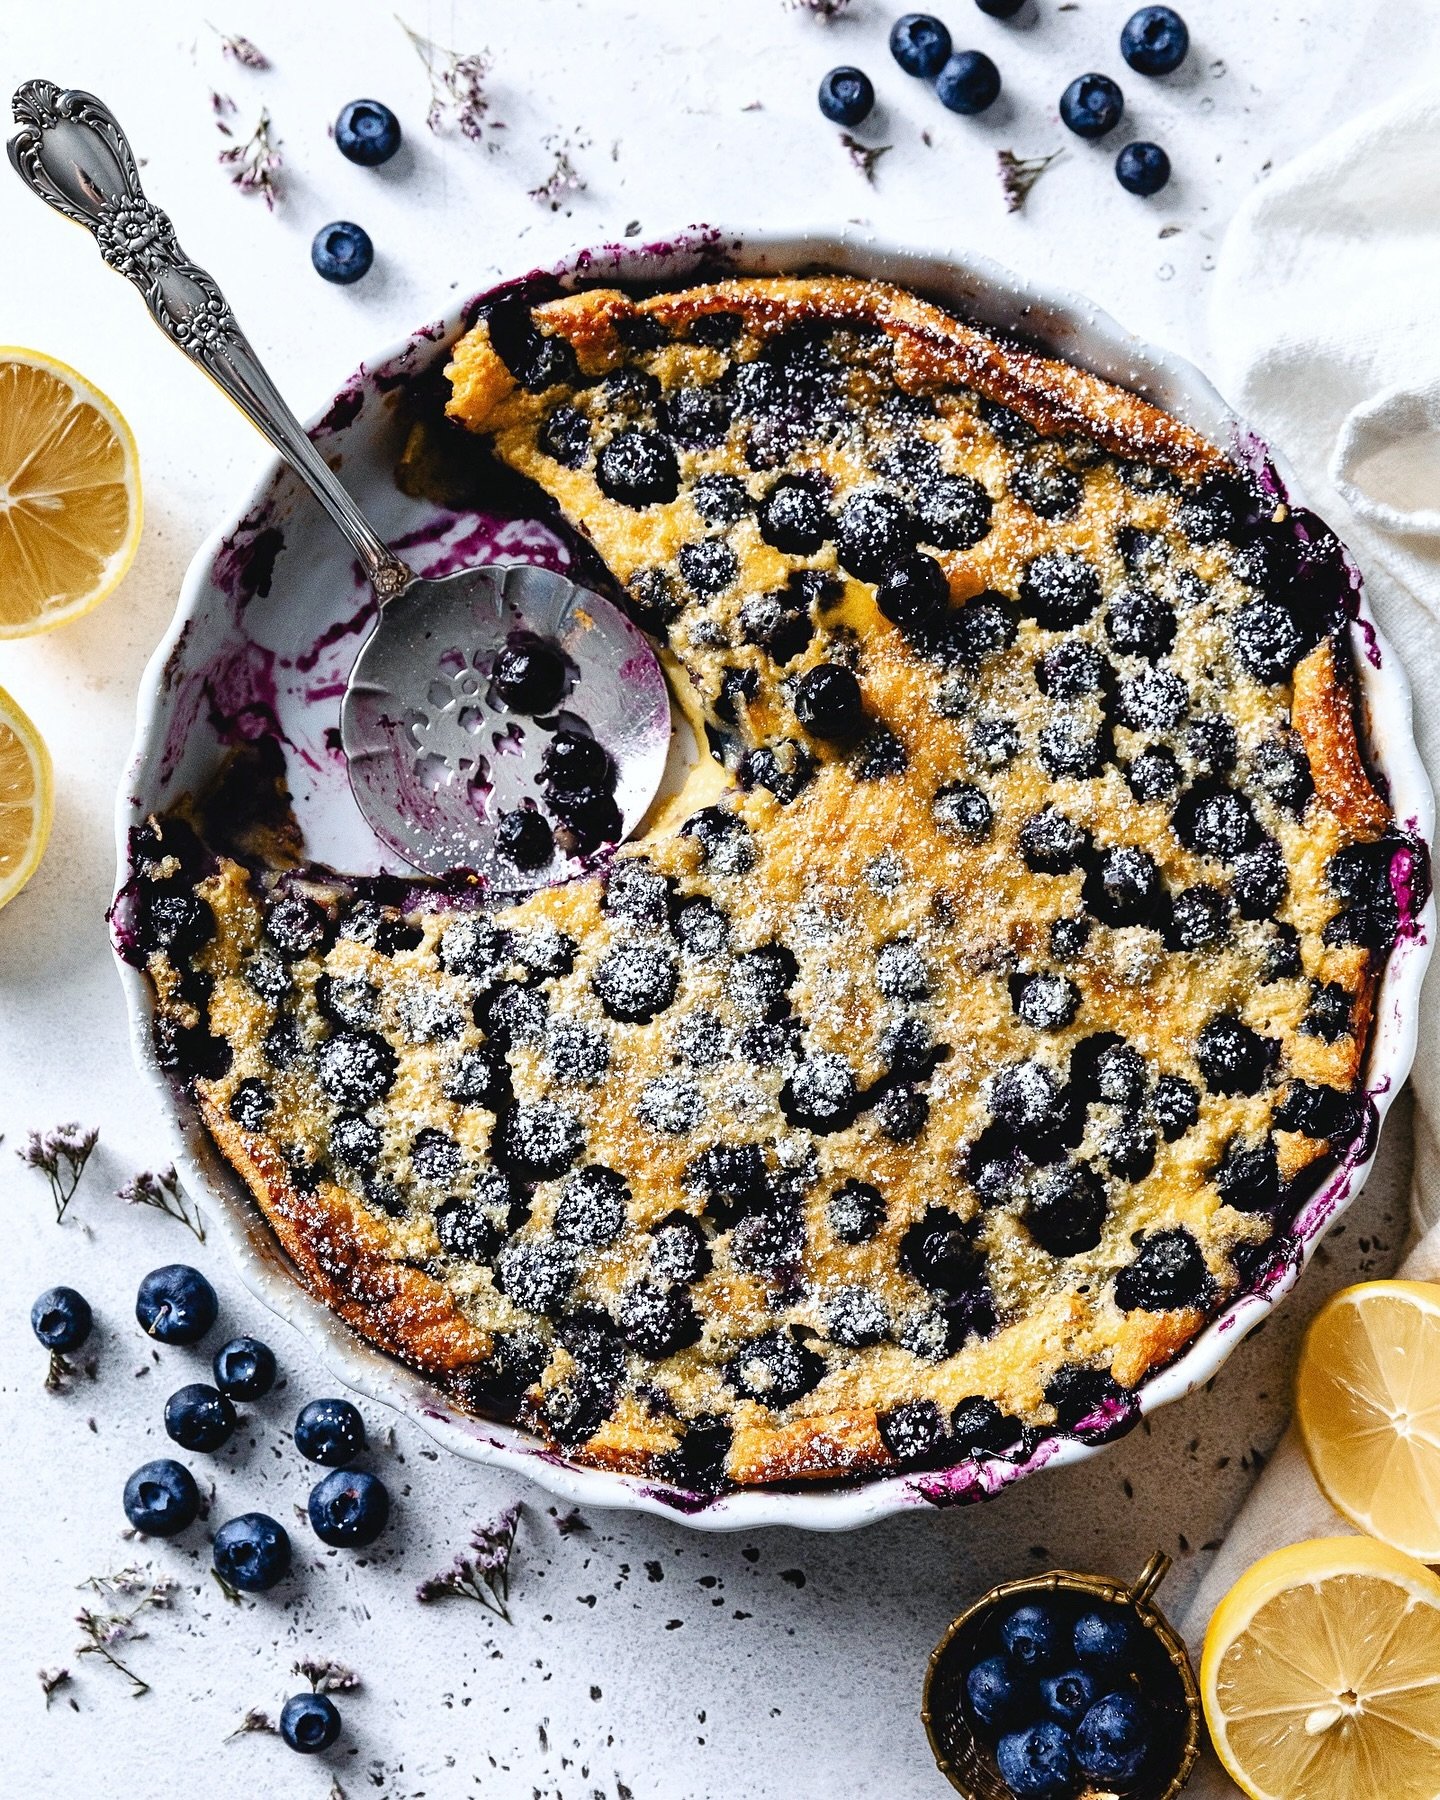 It doesn&rsquo;t get easier than this Blueberry Lemon Clafoutis! 🫐 This rich and cozy cake has a velvet pudding like consistency! It has been quite popular on the blog lately because let&rsquo;s face it, who doesn&rsquo;t love a simple always bake f